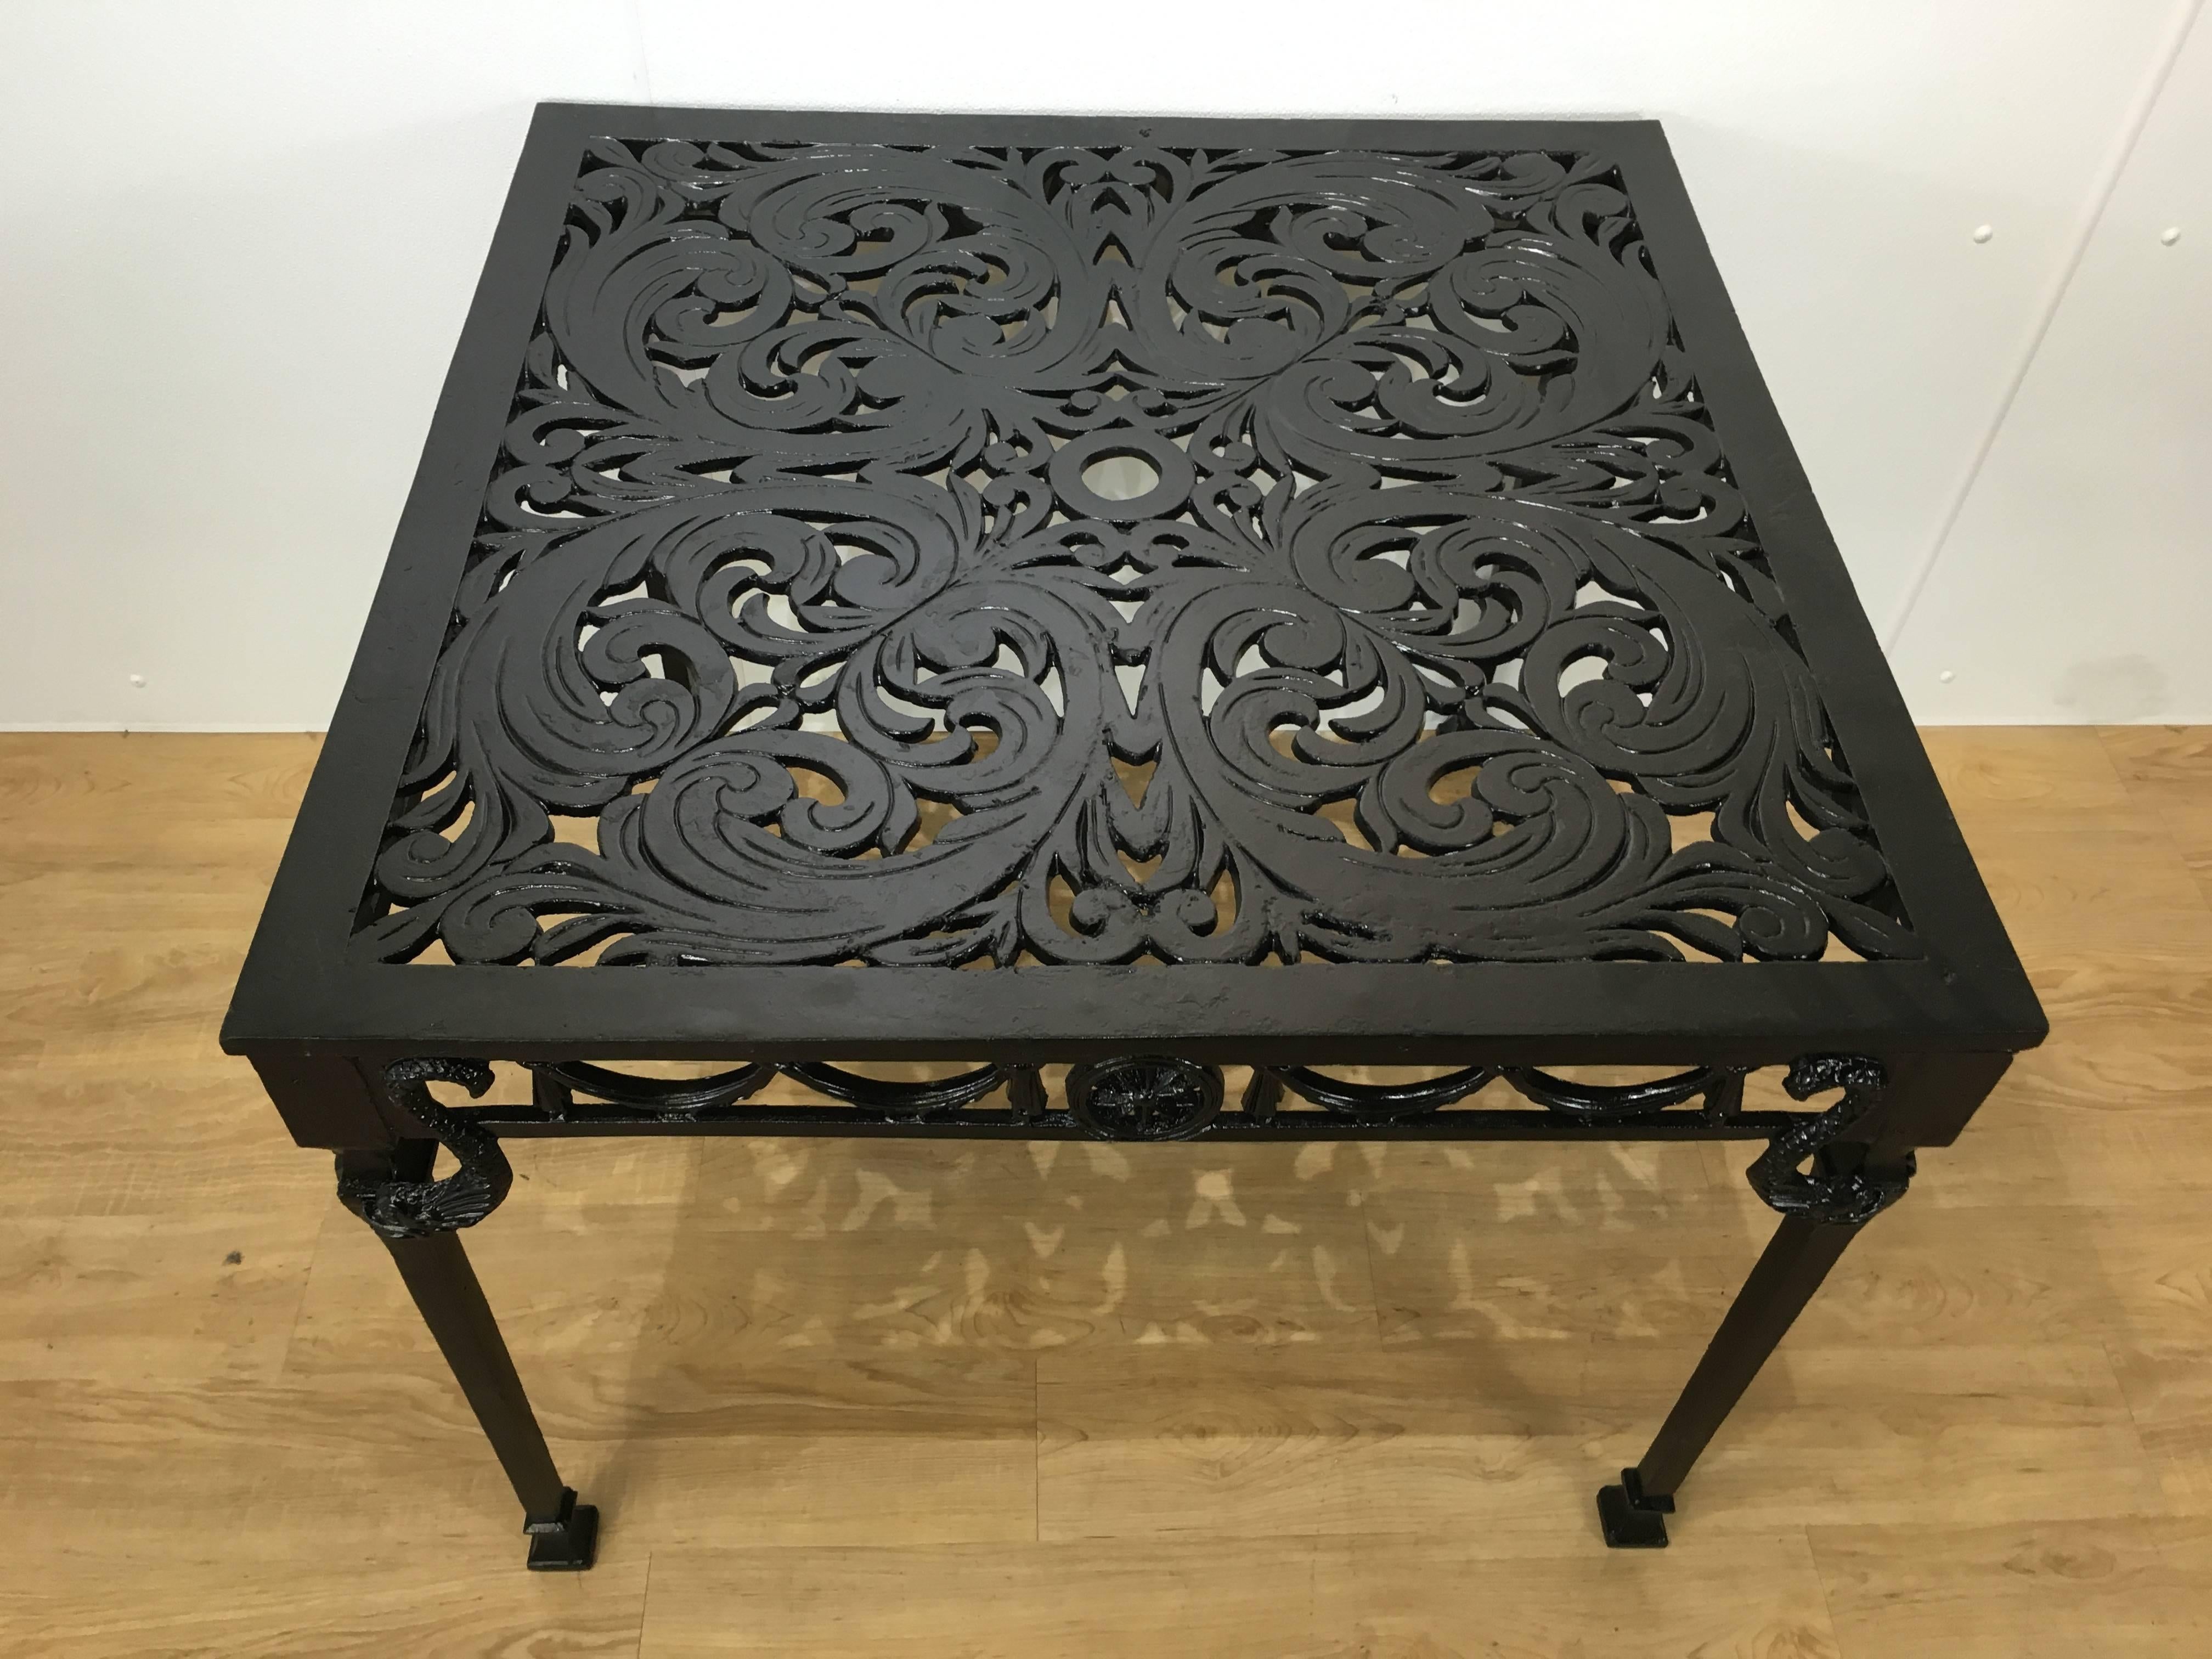 Neoclassical Molla Dolphin Motif Dining Table